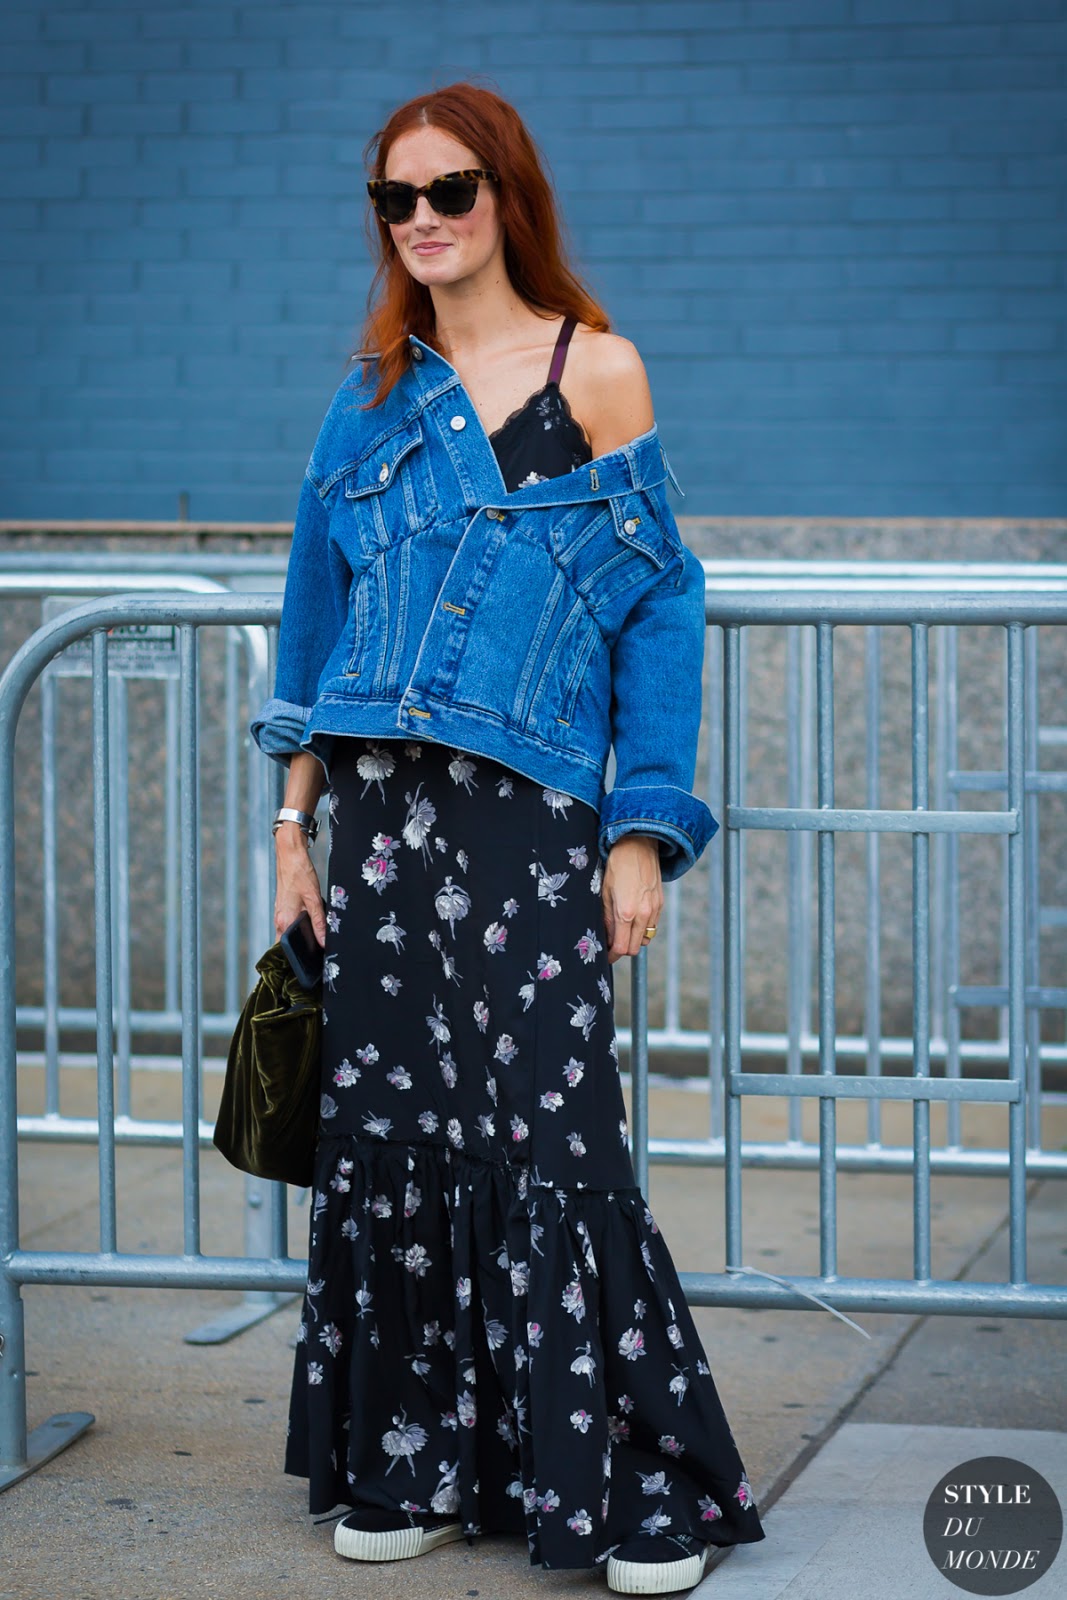 How to Wear a Floral Print Maxi Dress For Fall – Taylor Tomasi Hill Street Style